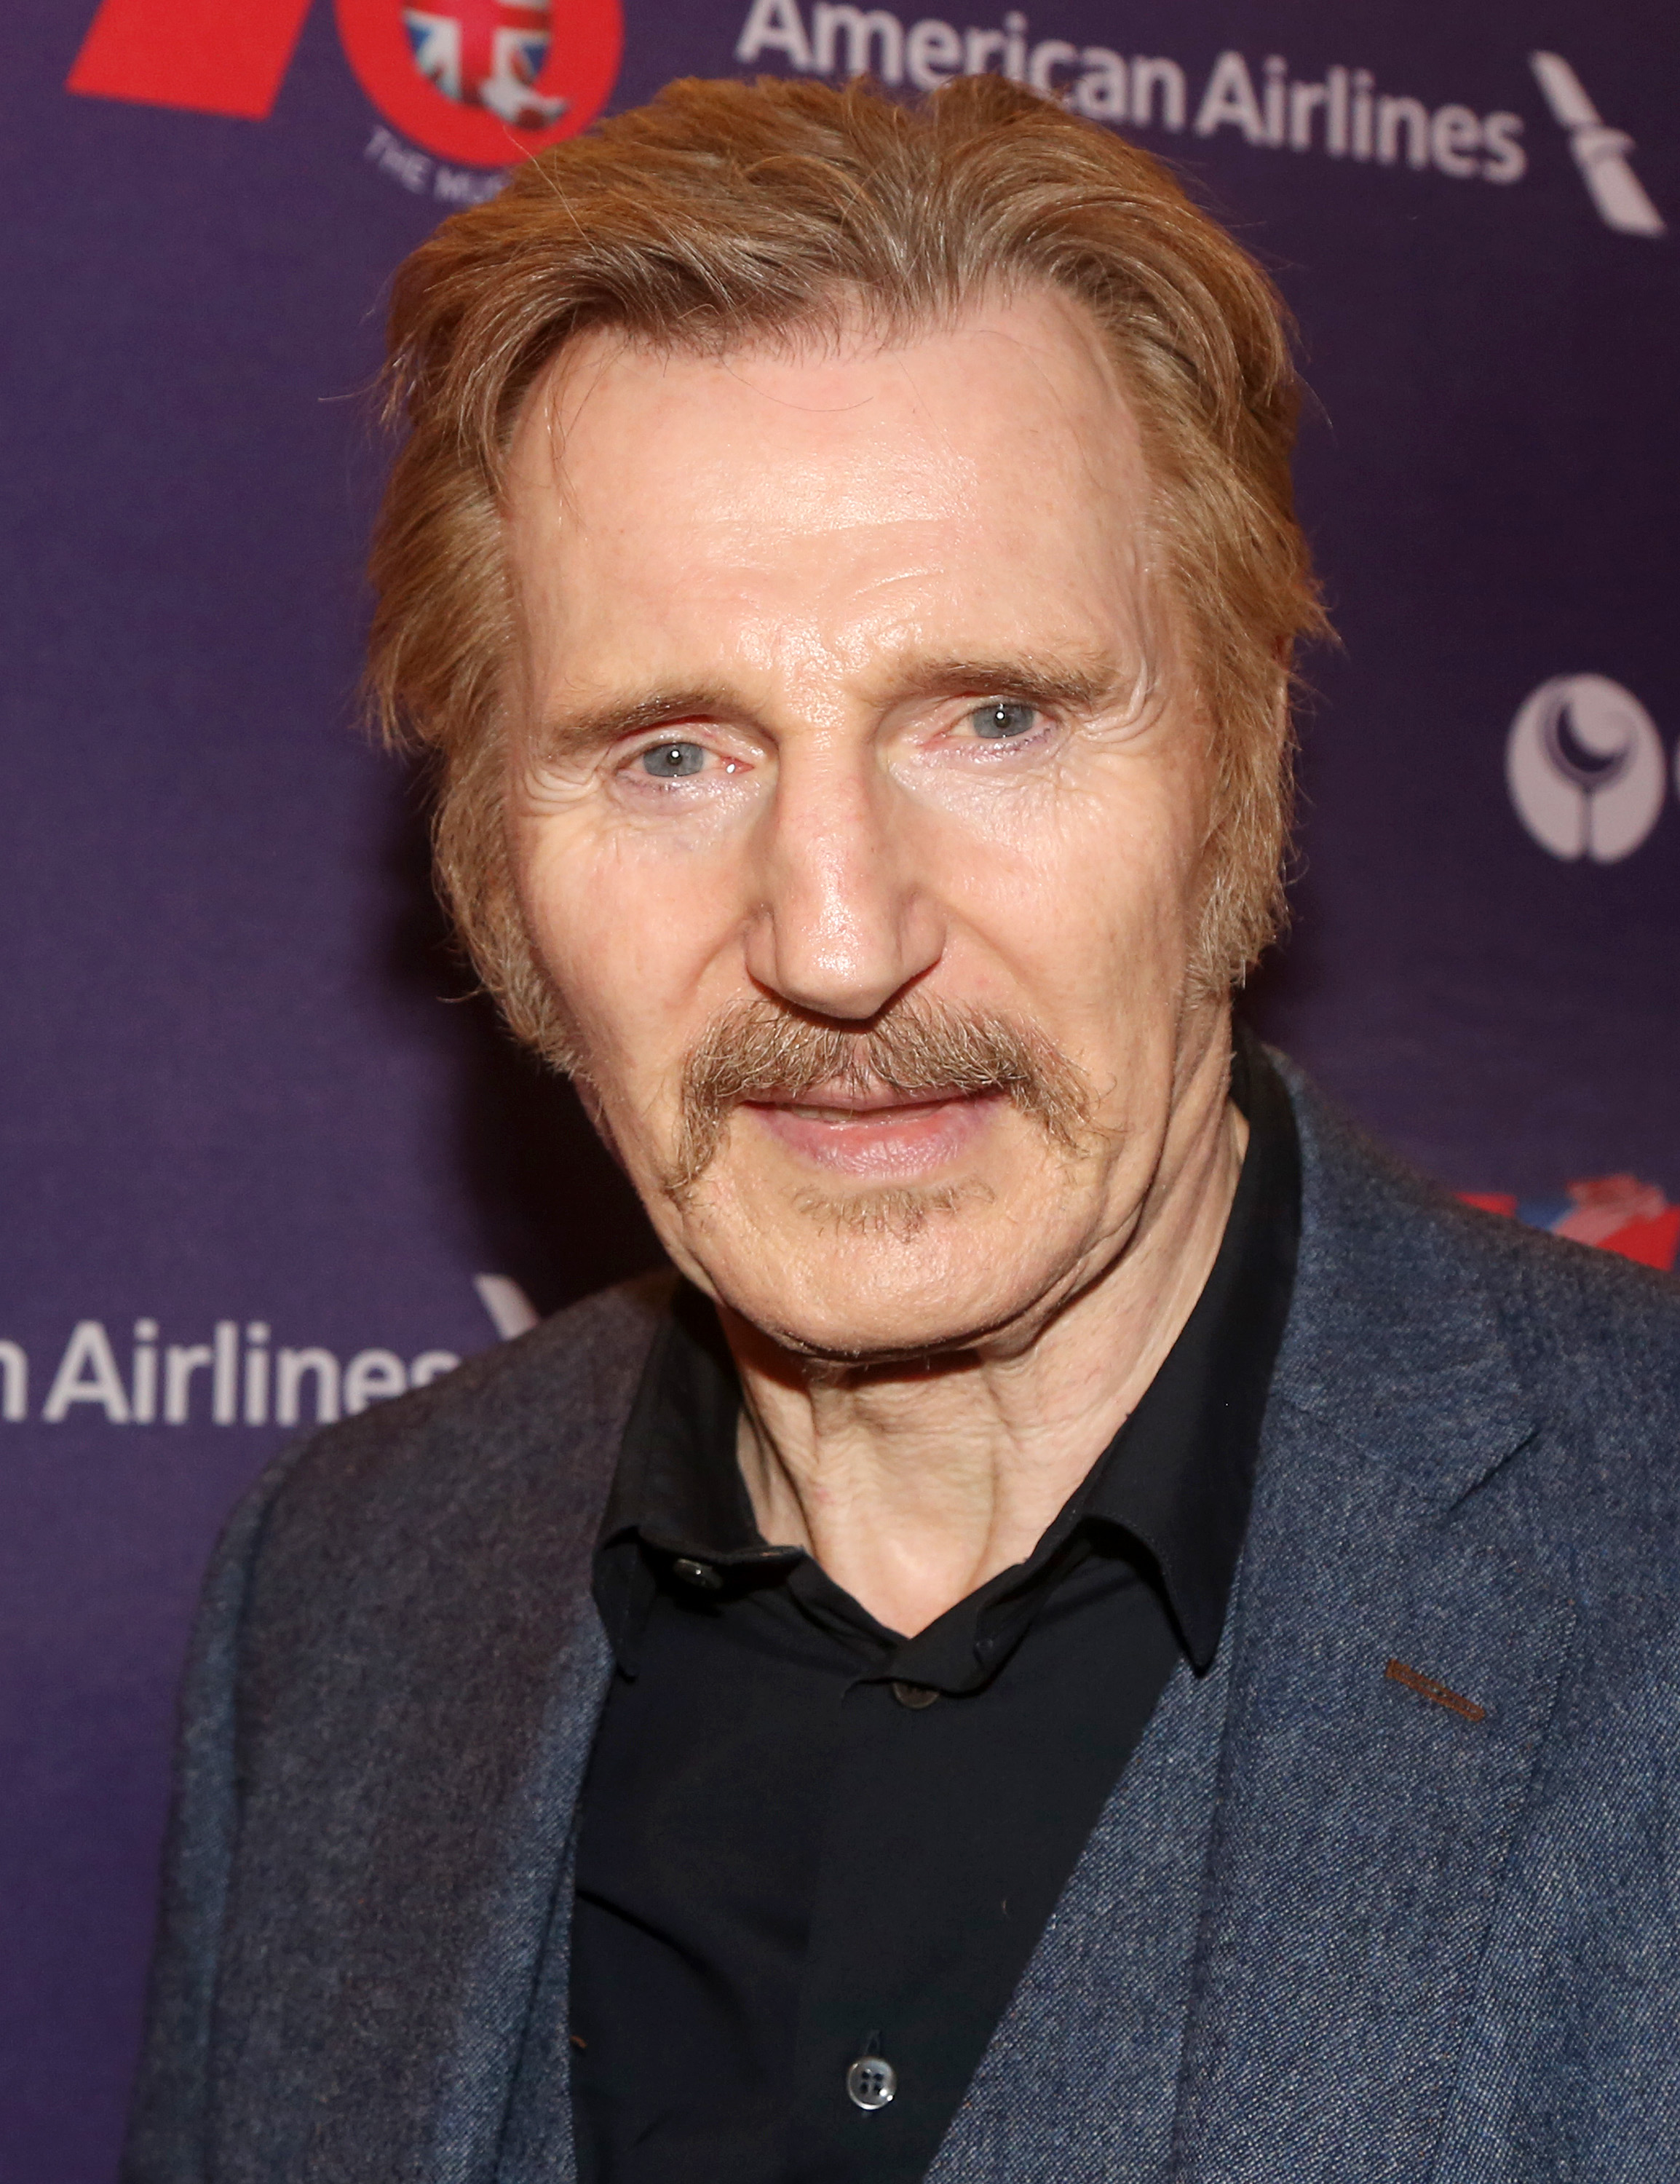 Liam Neeson at the American Airlines Theatre on October 6, 2022 in New York City | Source: Getty Images